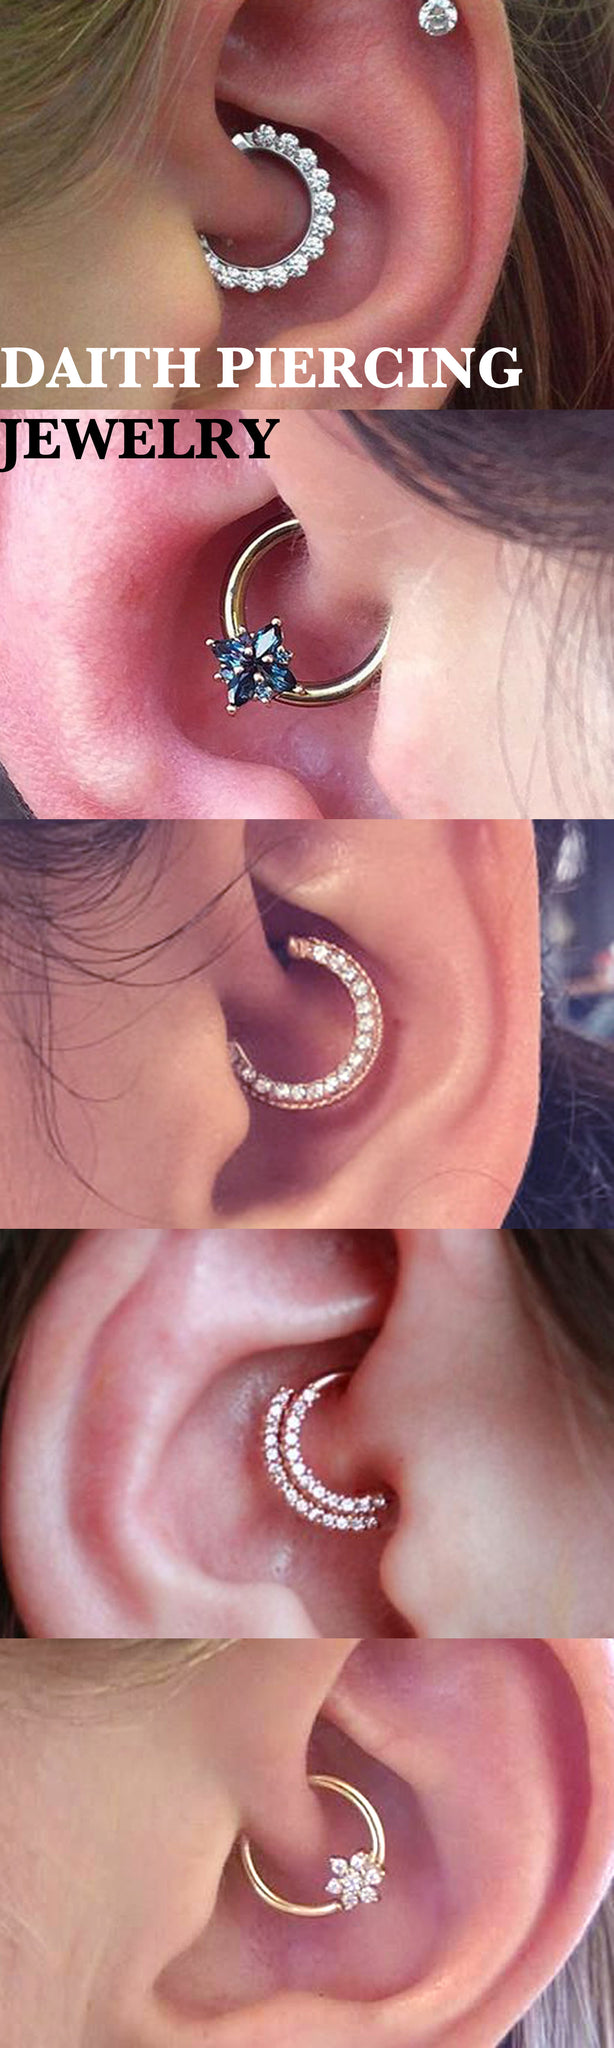 Cute Ear Piercing Ideas Rook Ring Hoop 16G  Daith Jewelry Earring in Rose Gold at MyBodiArt.com